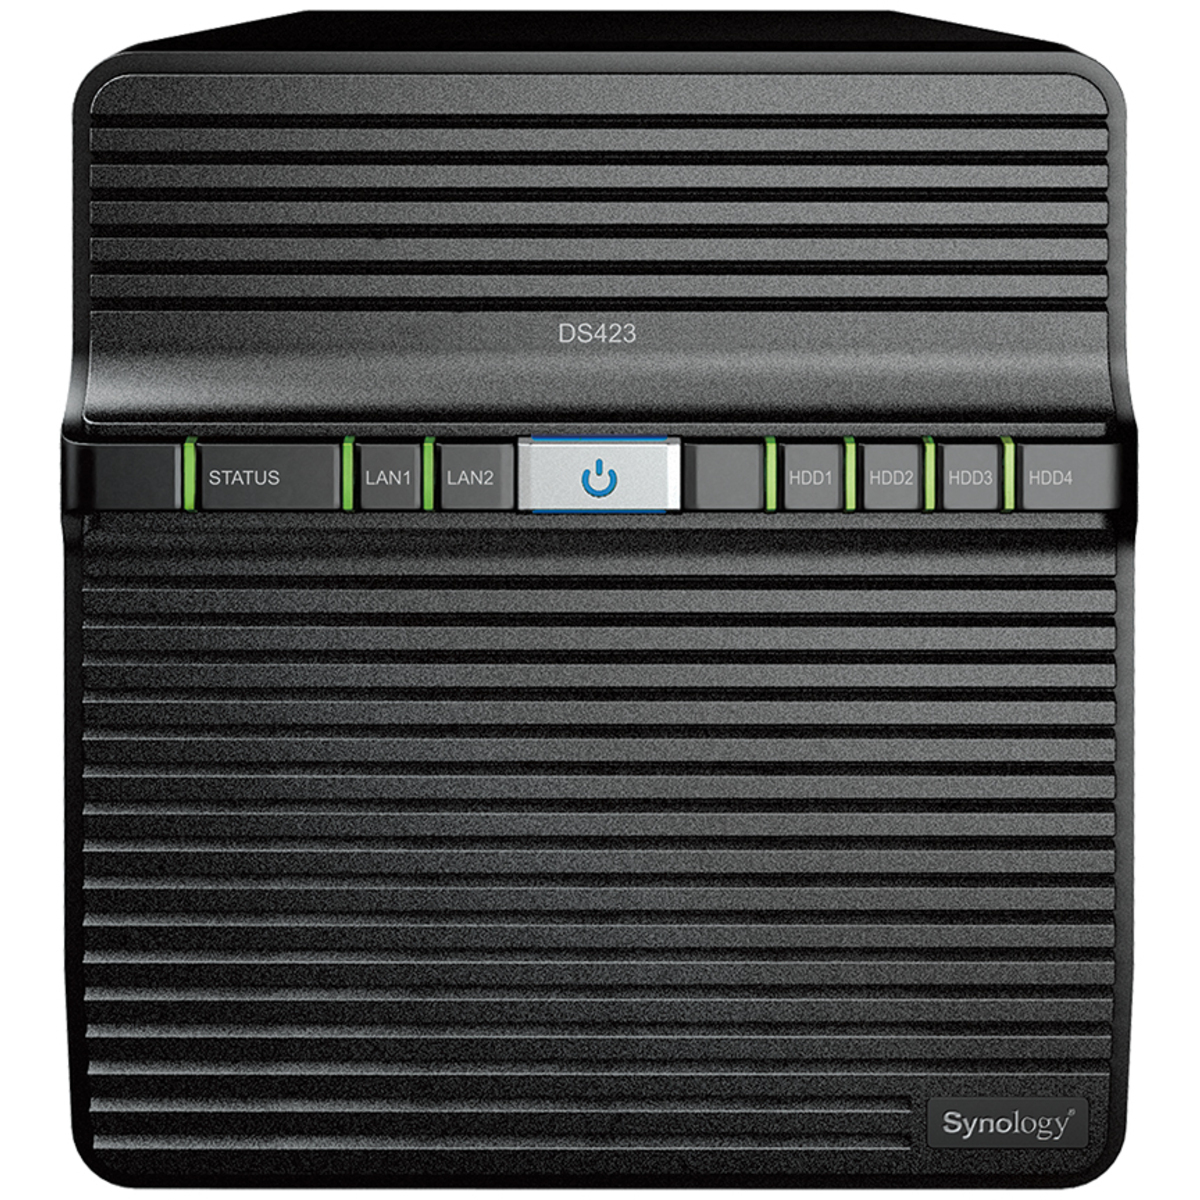 Synology DiskStation DS423 64tb 4-Bay Desktop Personal / Basic Home / Small Office NAS - Network Attached Storage Device 4x16tb Seagate EXOS X18 ST16000NM000J 3.5 7200rpm SATA 6Gb/s HDD ENTERPRISE Class Drives Installed - Burn-In Tested DiskStation DS423